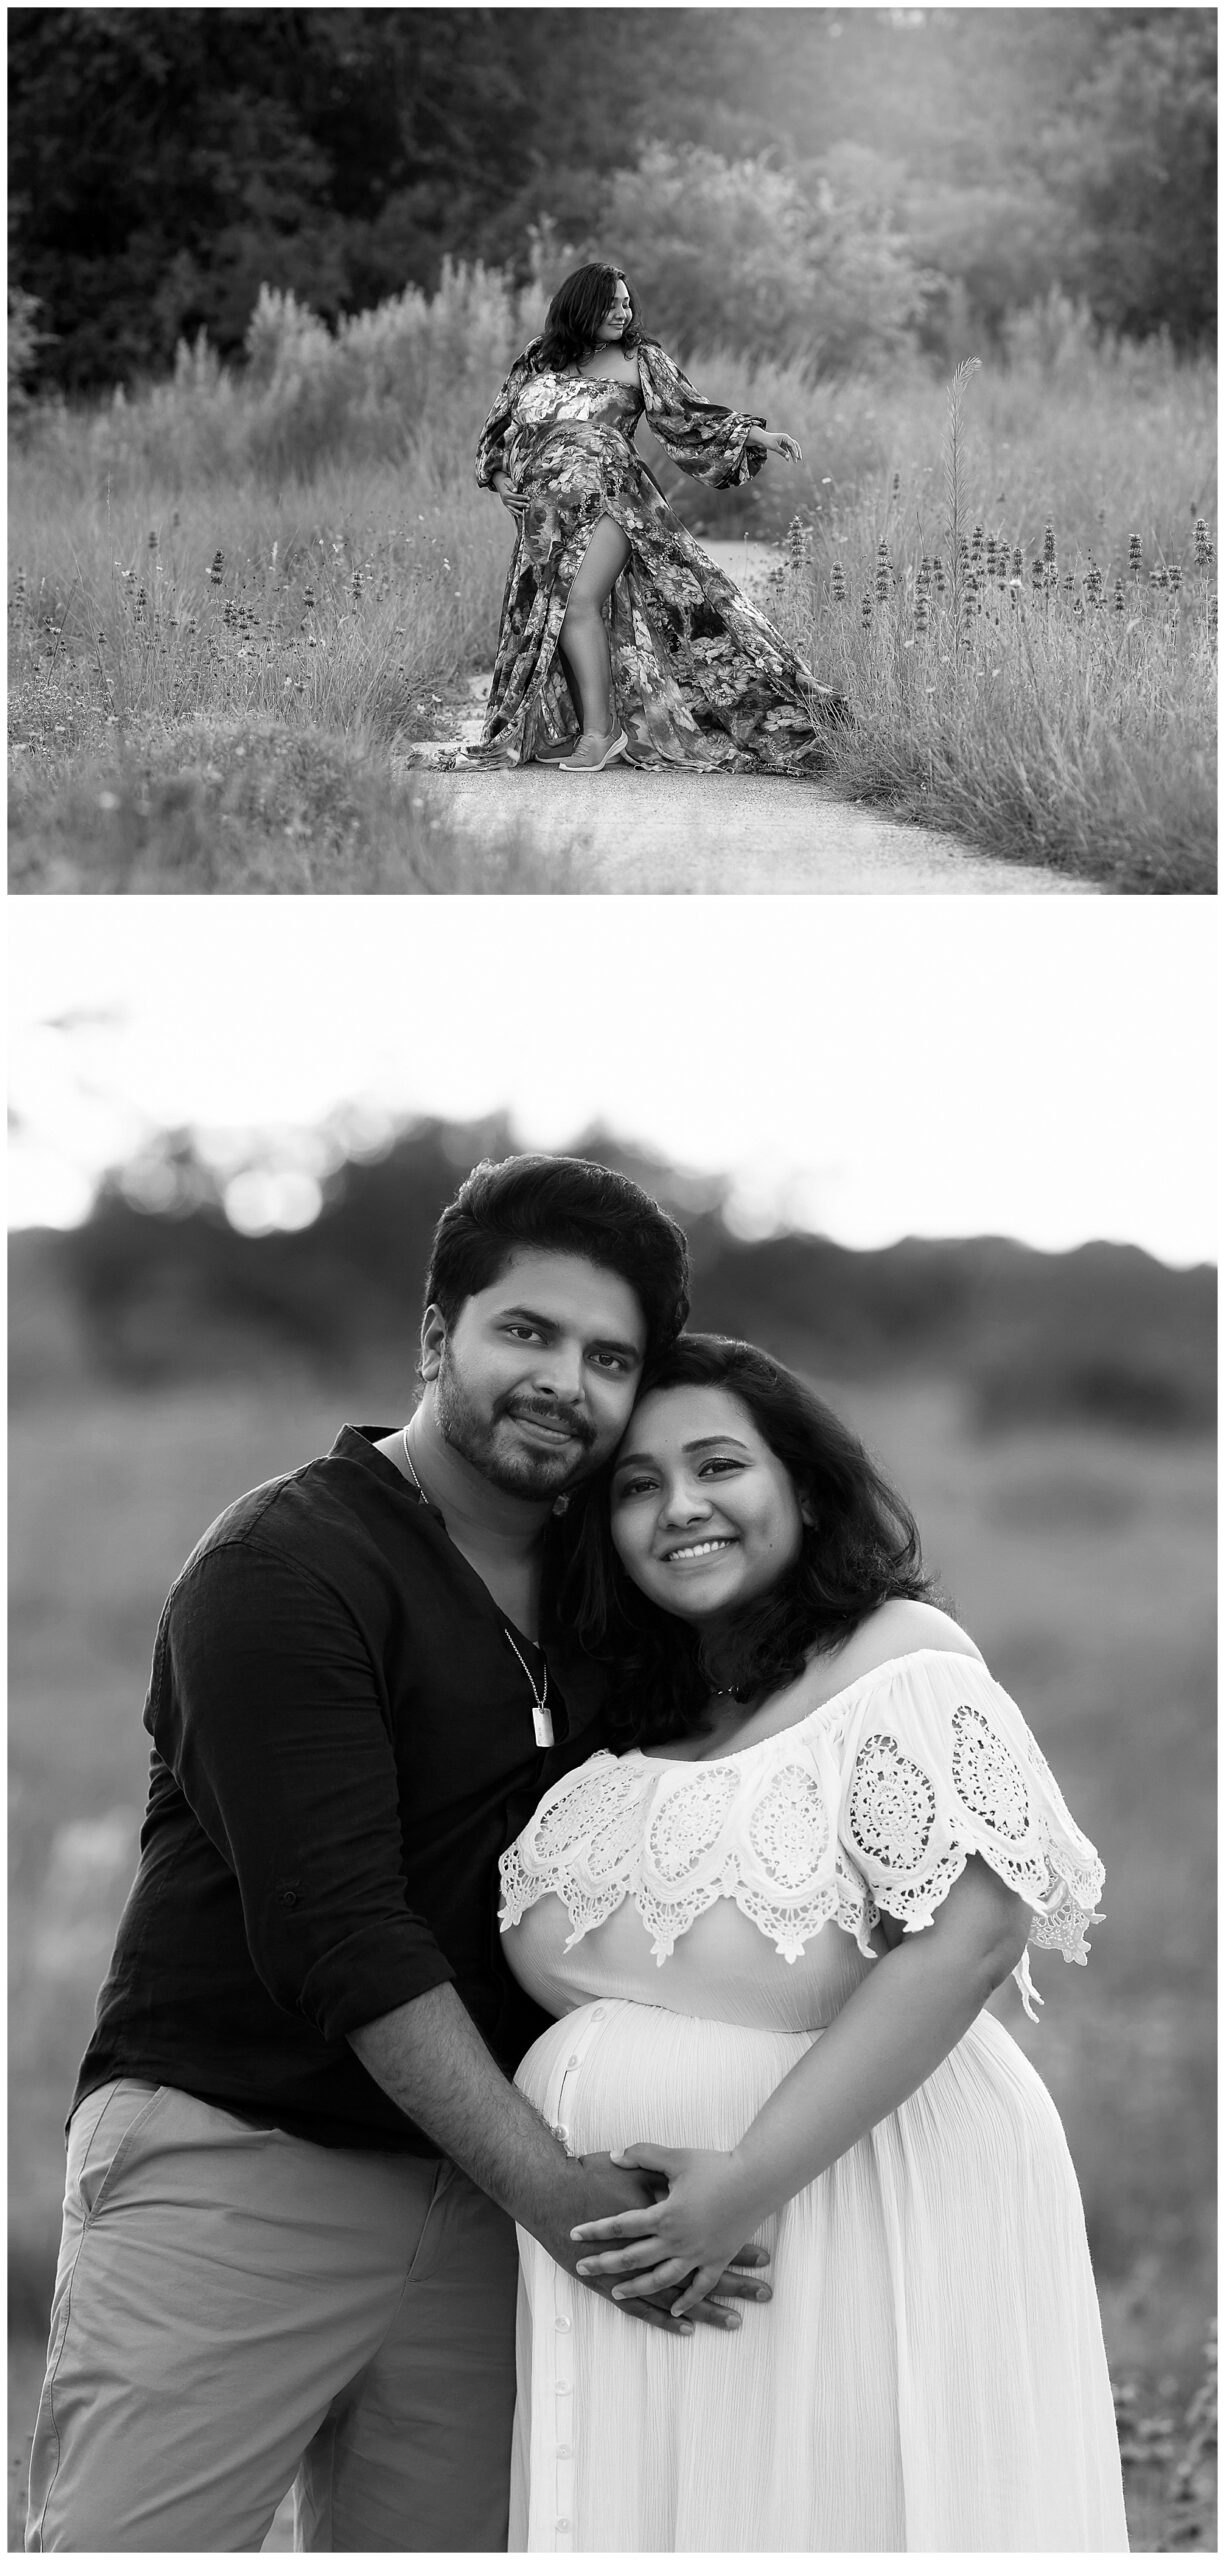 Two black and white maternity photos. The top photo features a pregnant woman posing her baby bump in a floral gown. The bottom photo shows a man in a black shirt and a woman in a white gown posing together.